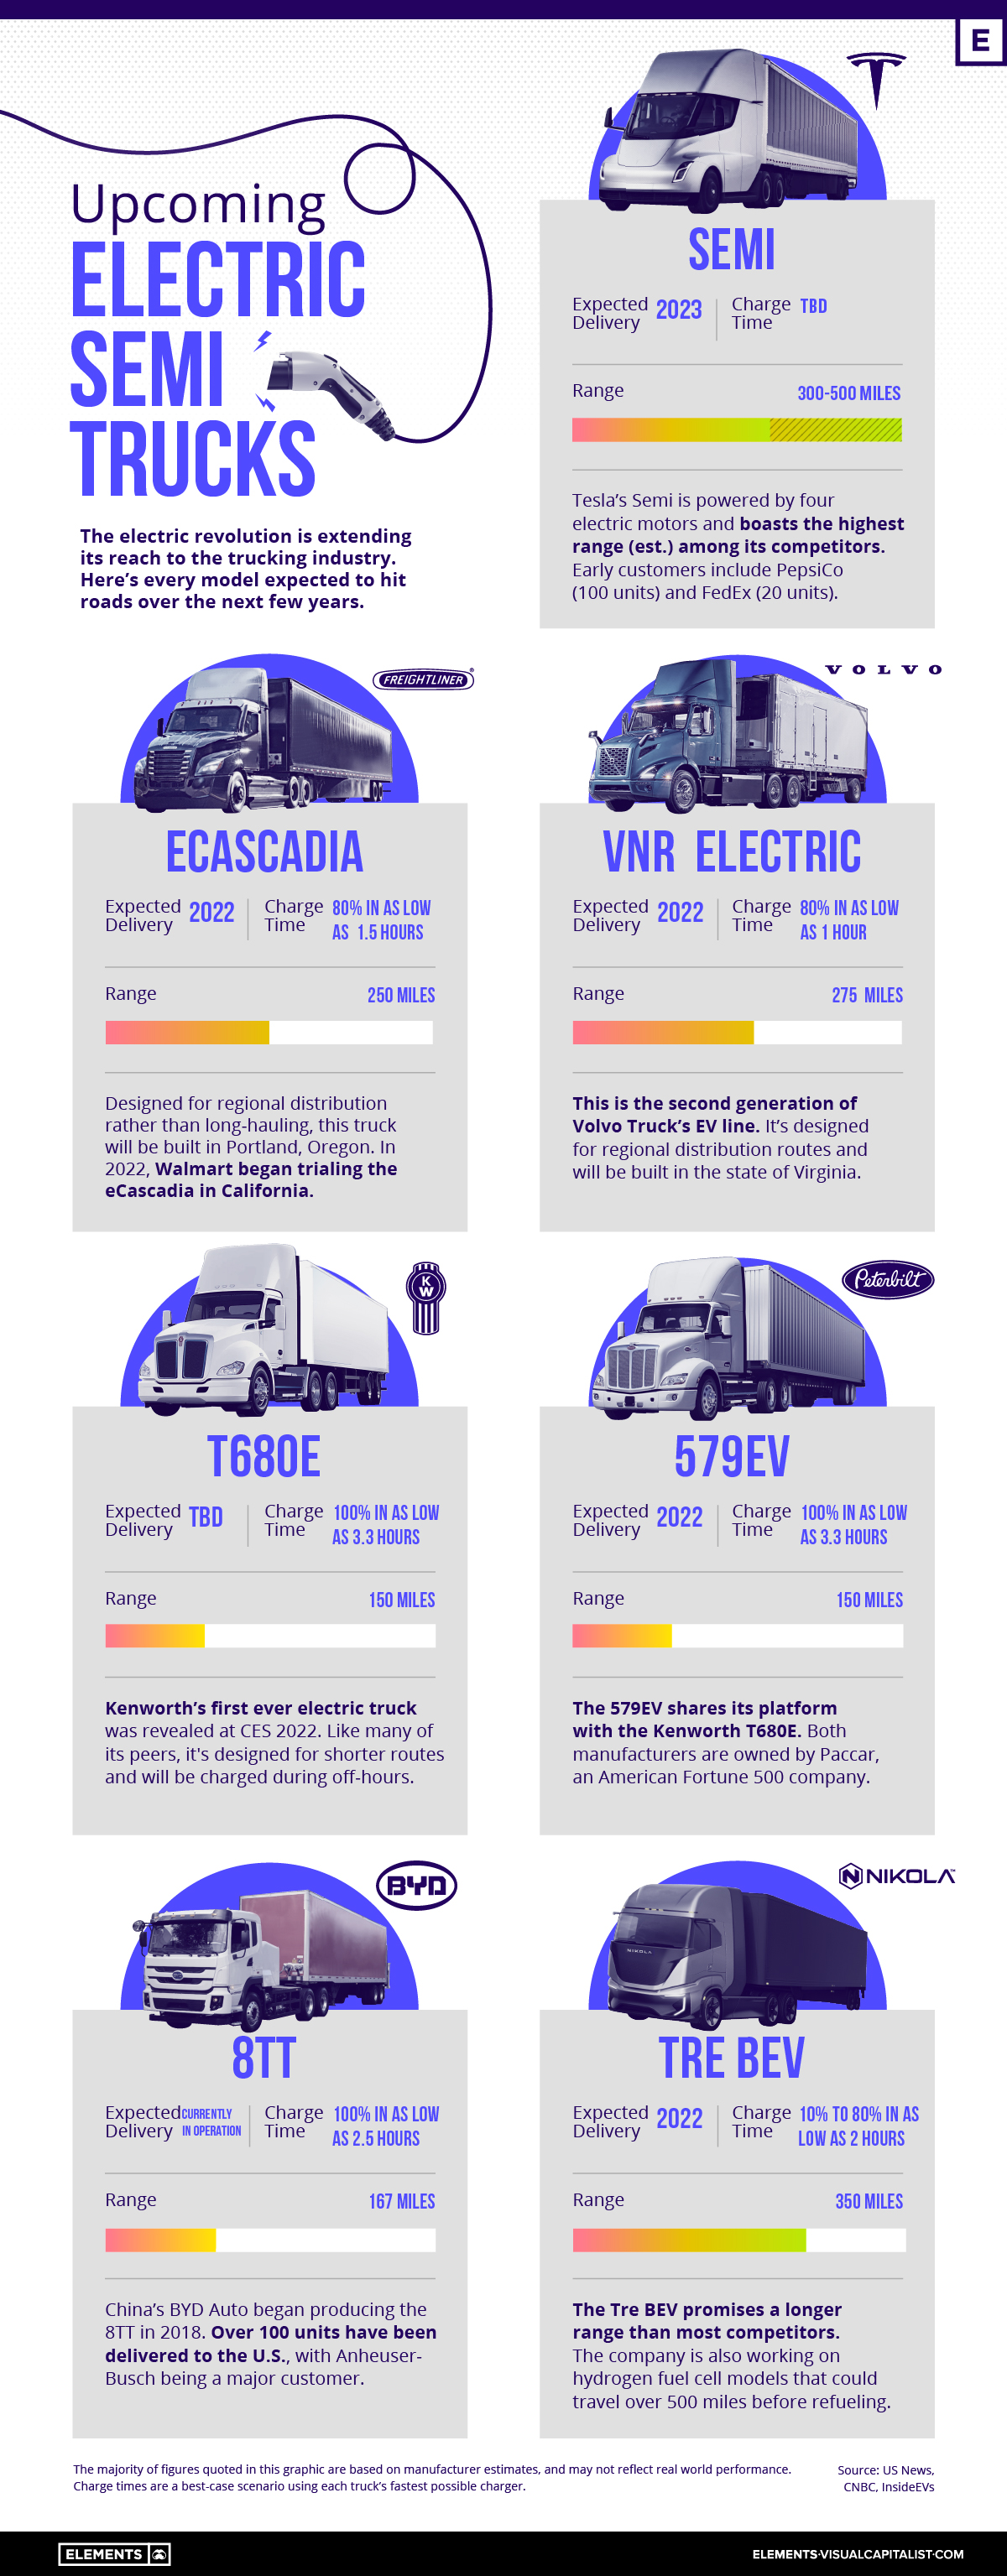 Every Electric Semi Truck in One Graphic